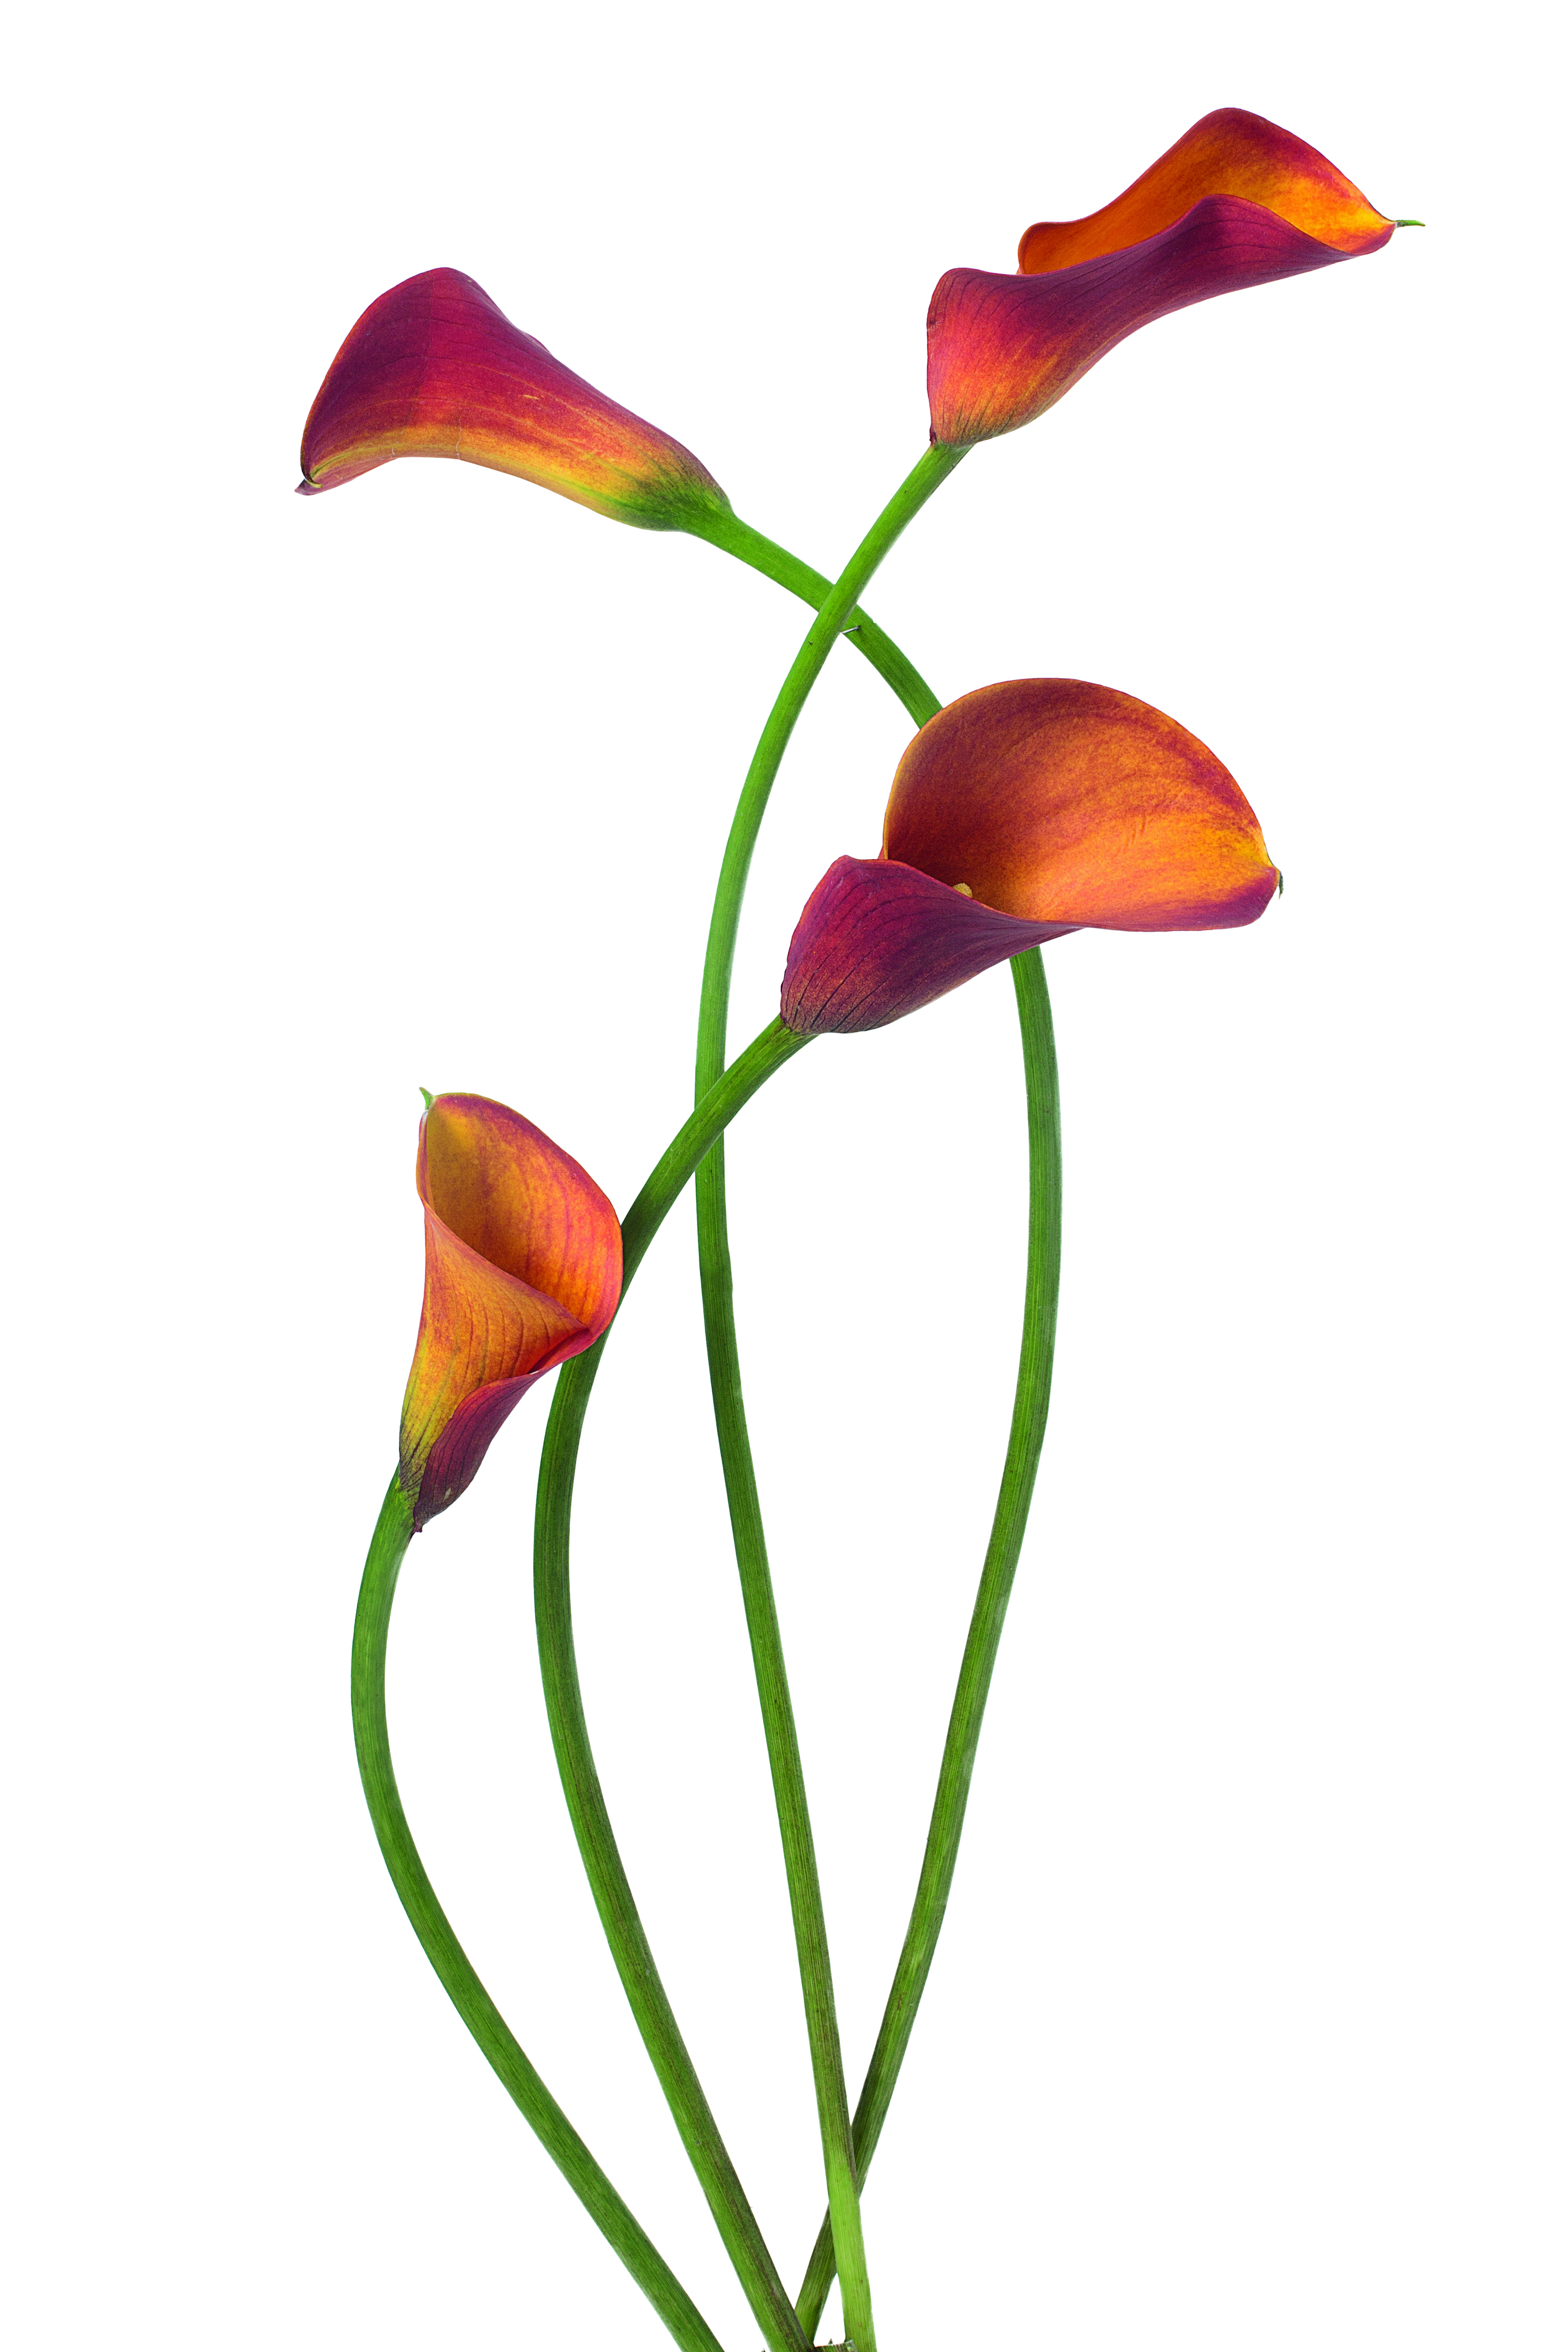 Calla lilies from The Flower Colour Guide